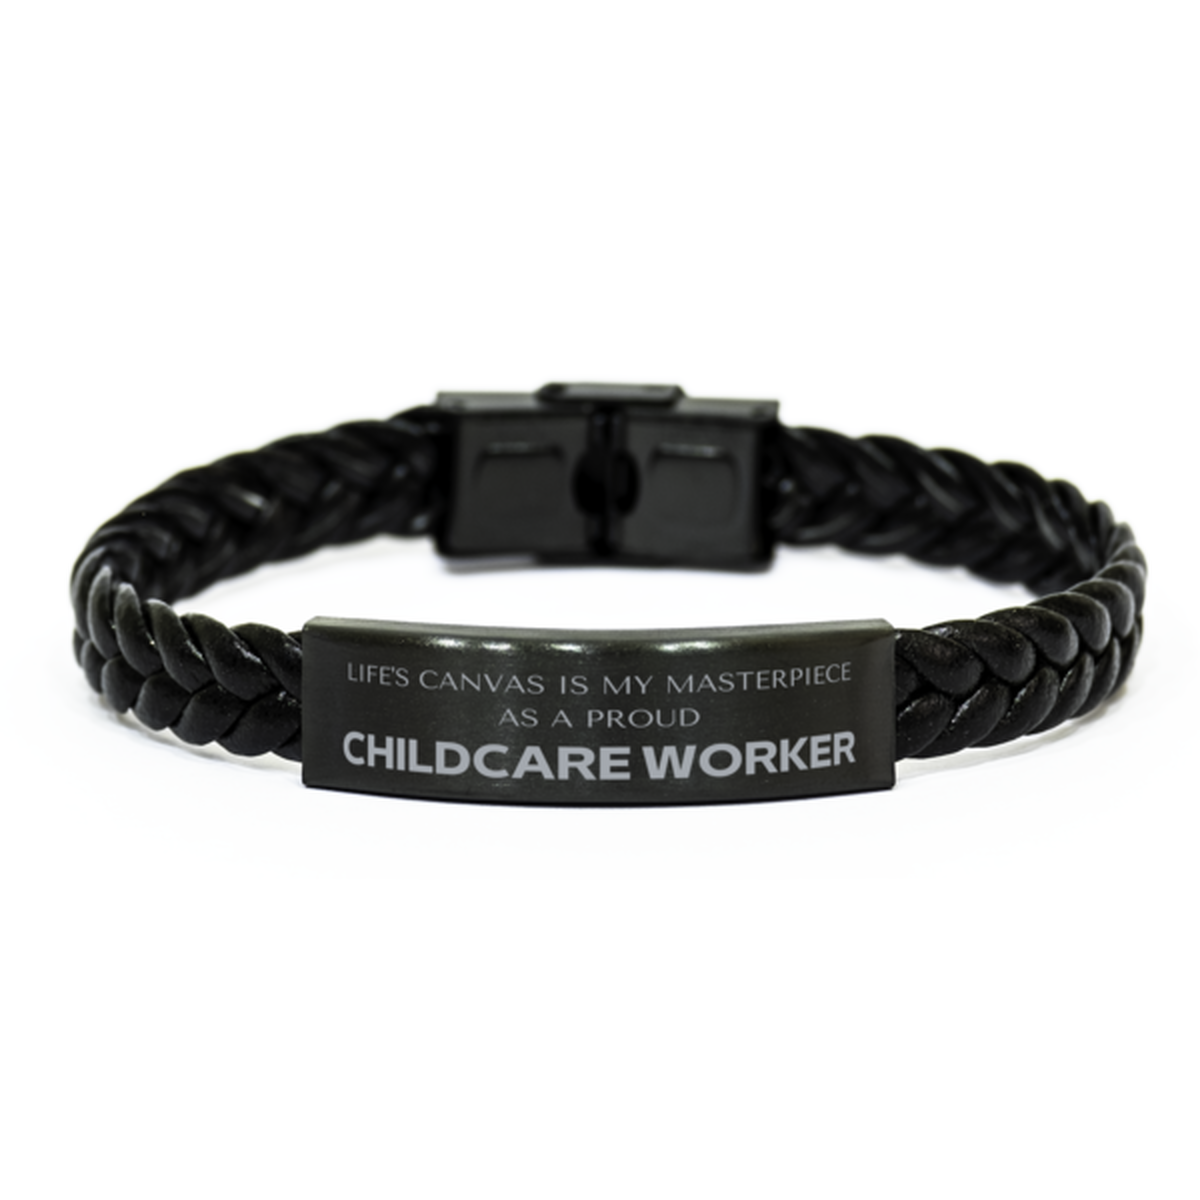 Proud Childcare Worker Gifts, Life's canvas is my masterpiece, Epic Birthday Christmas Unique Braided Leather Bracelet For Childcare Worker, Coworkers, Men, Women, Friends